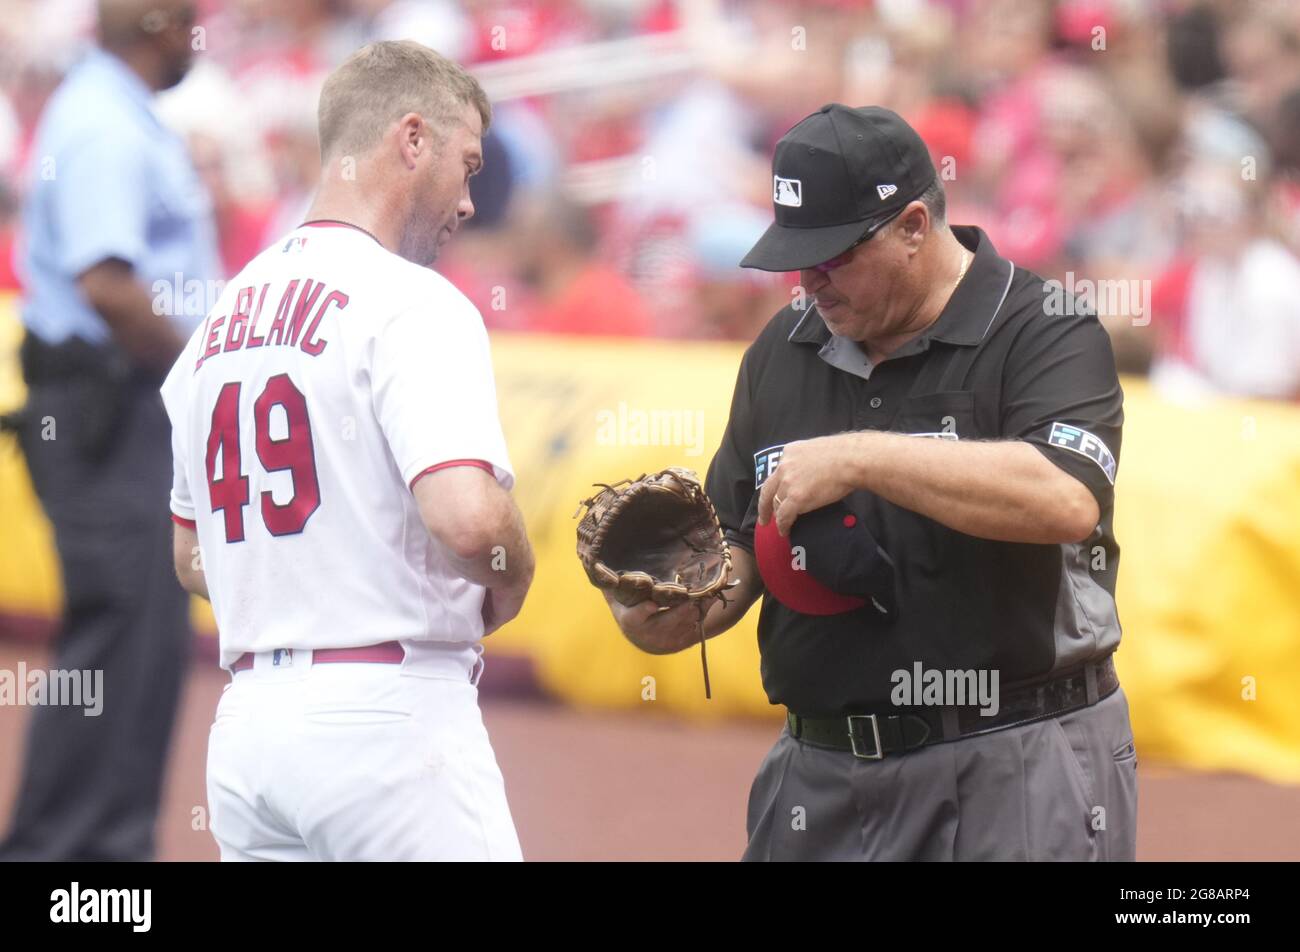 St. Louis, United States. 18th July, 2021. First base umpire Tony Randazzo checks the cap and glove of St. Louis Cardinals starting pitcher Wade LeBlanc in the fifth inning against the San Francisco Giants at Busch Stadium in St. Louis on Sunday, July 18, 2021. Photo by Bill Greenblatt/UPI Credit: UPI/Alamy Live News Stock Photo